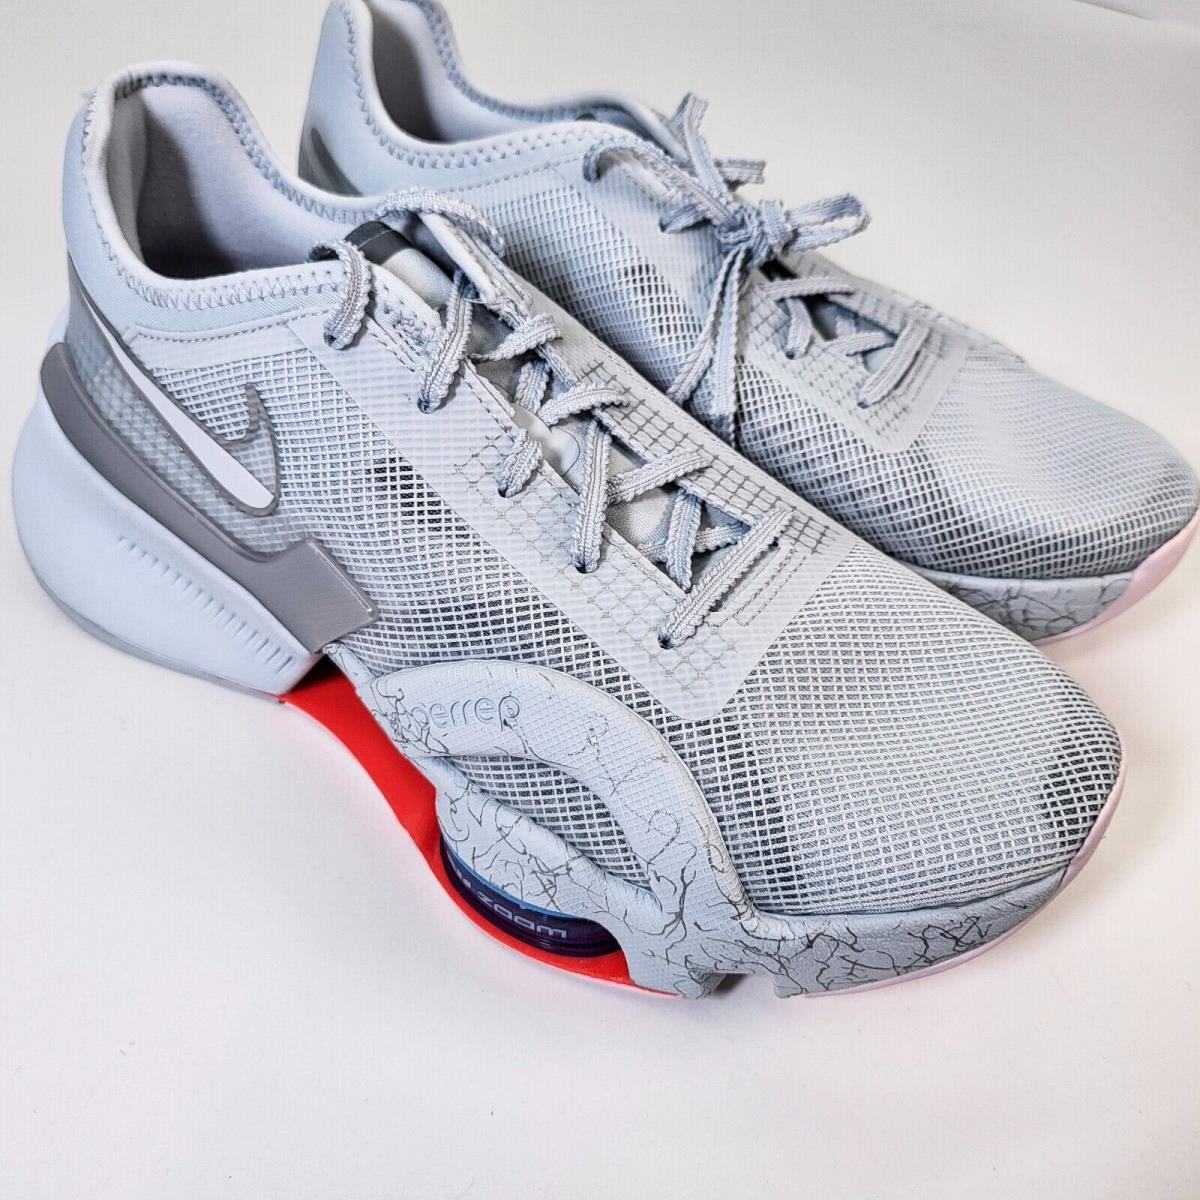 Nike shoes SuperRep - Silver 0